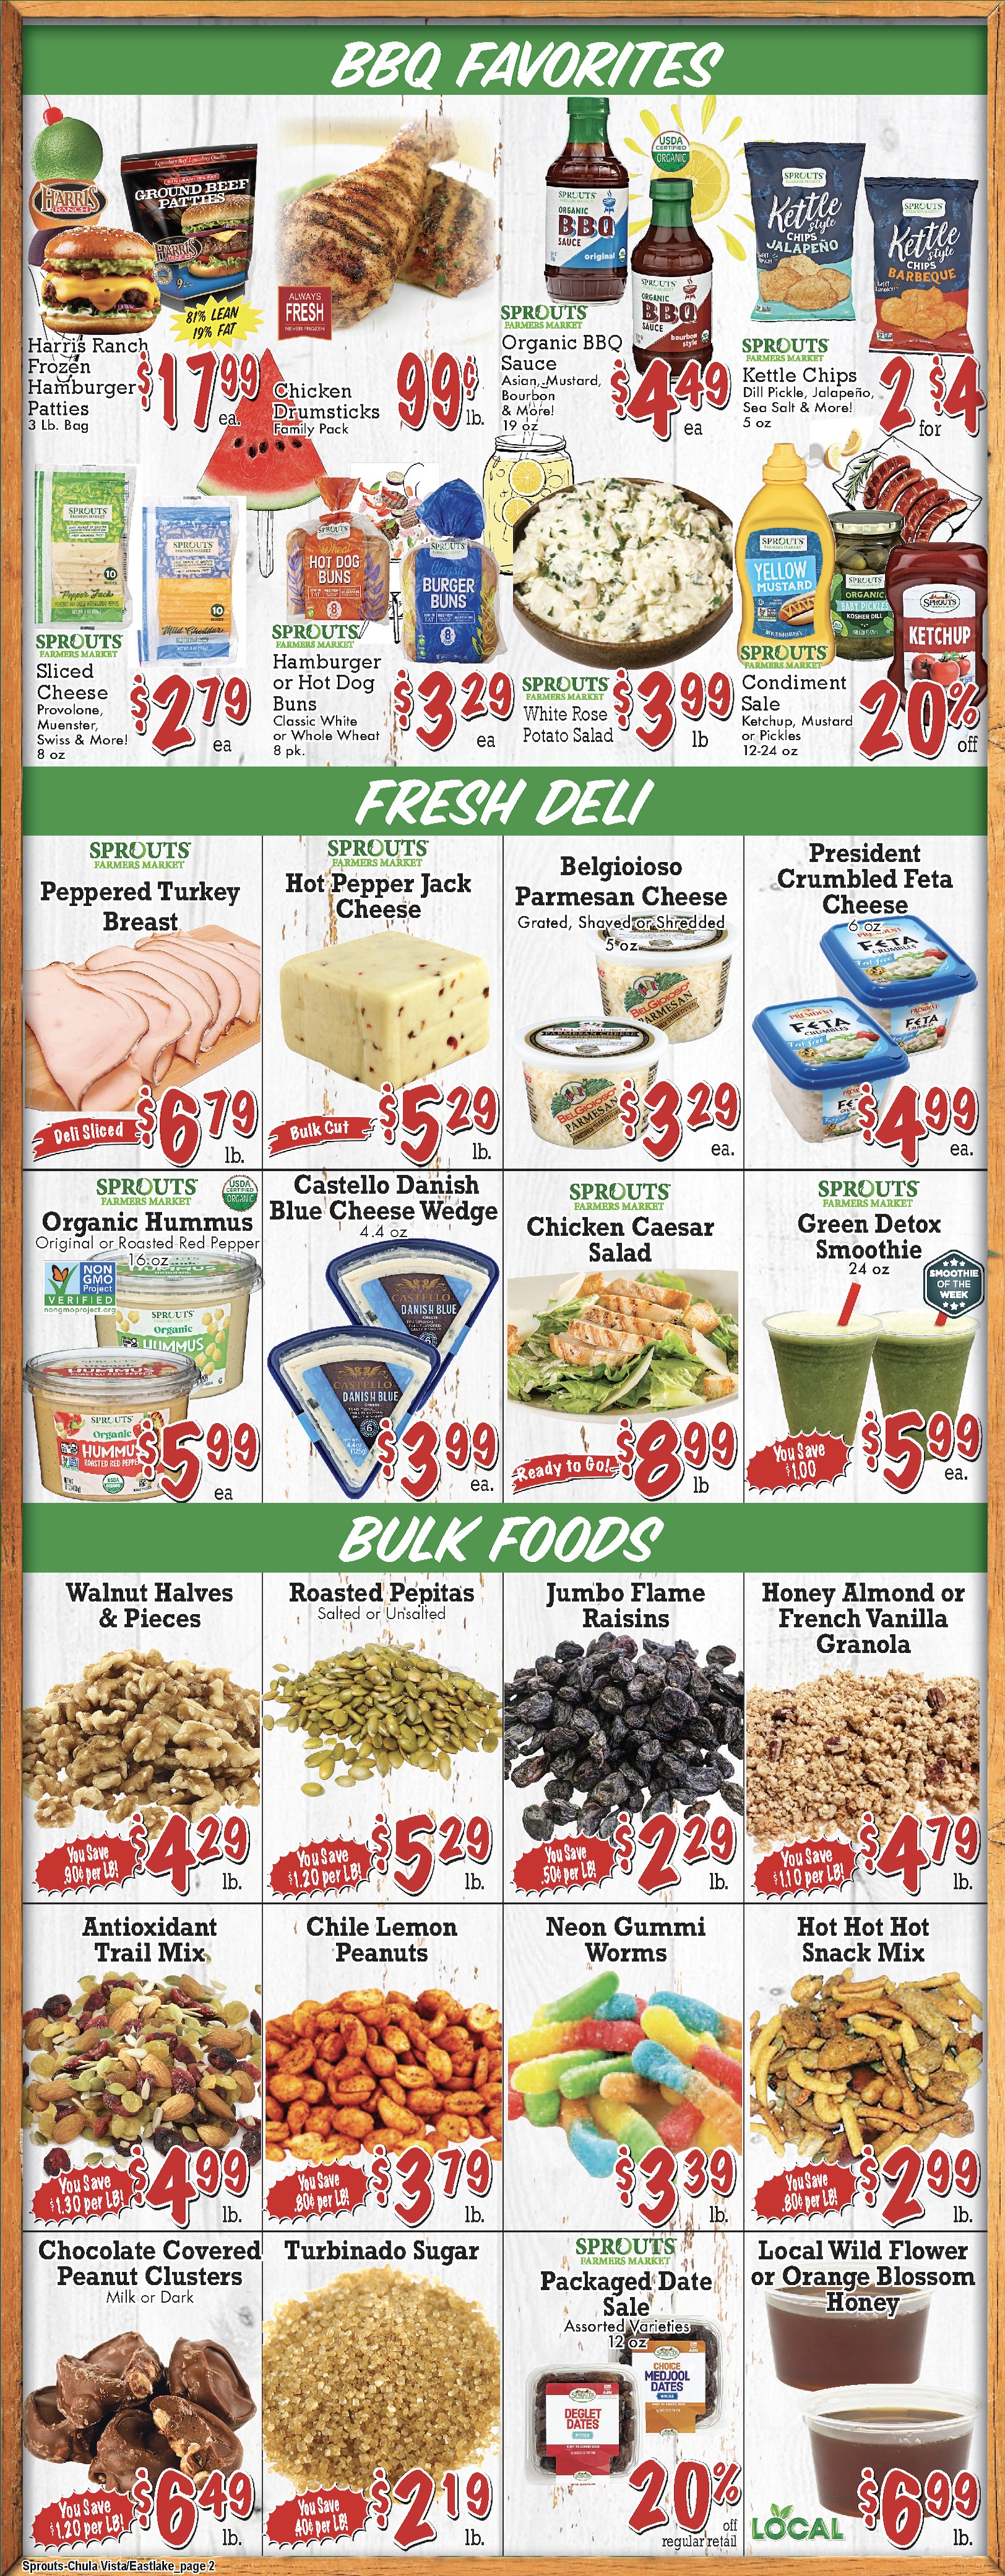 Weekly ad page2